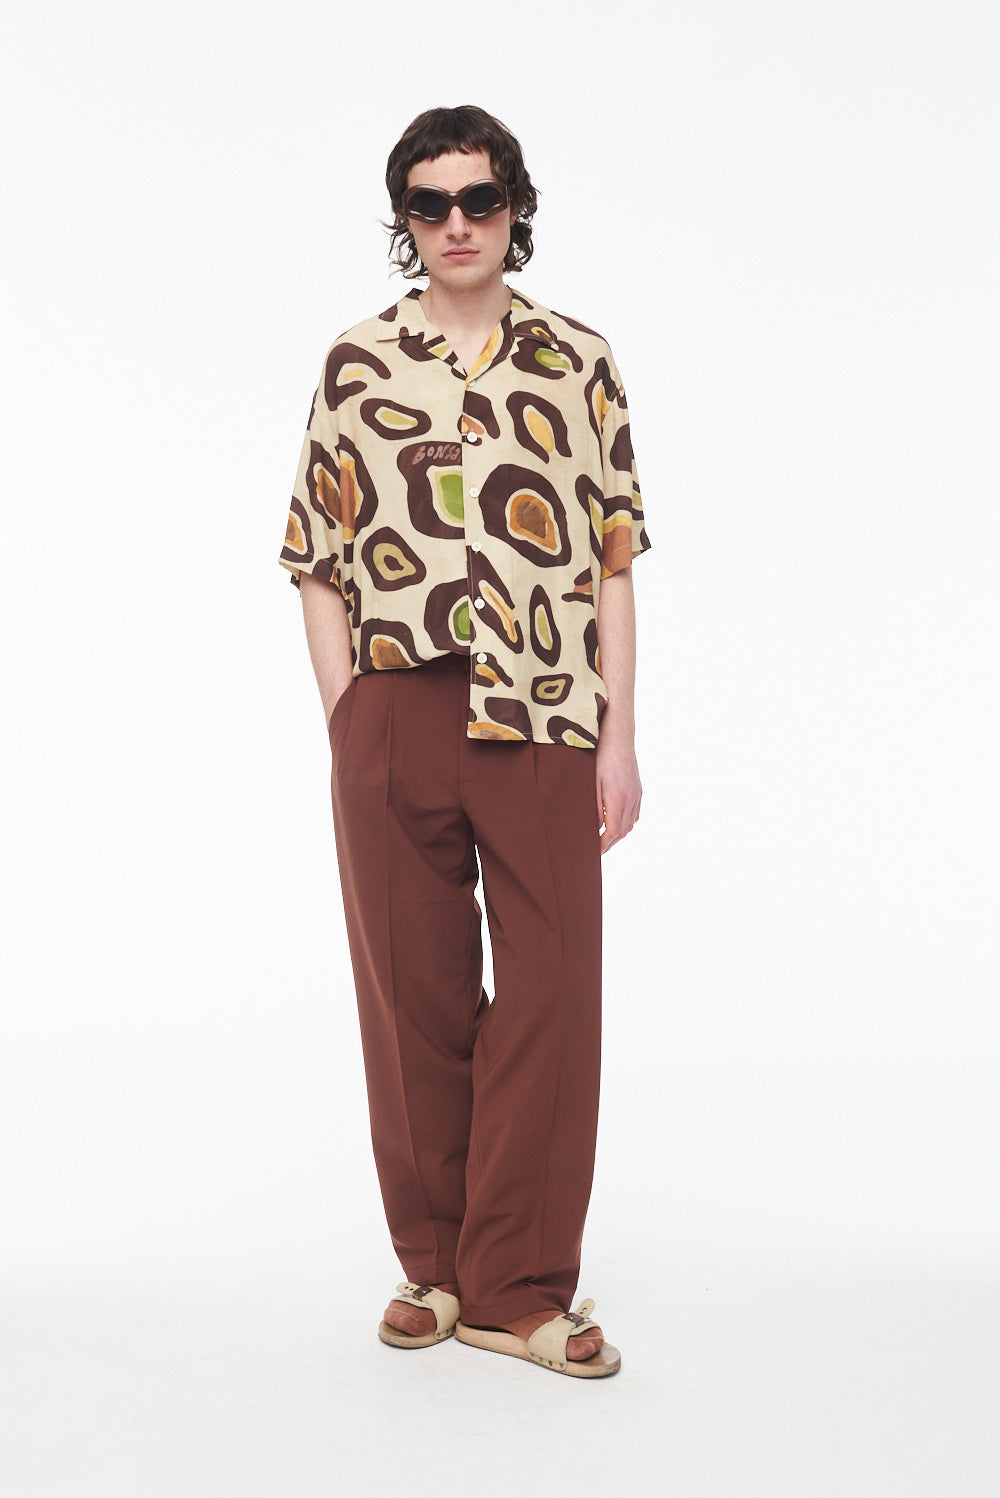 COCCINELLE BOWLING SHIRT